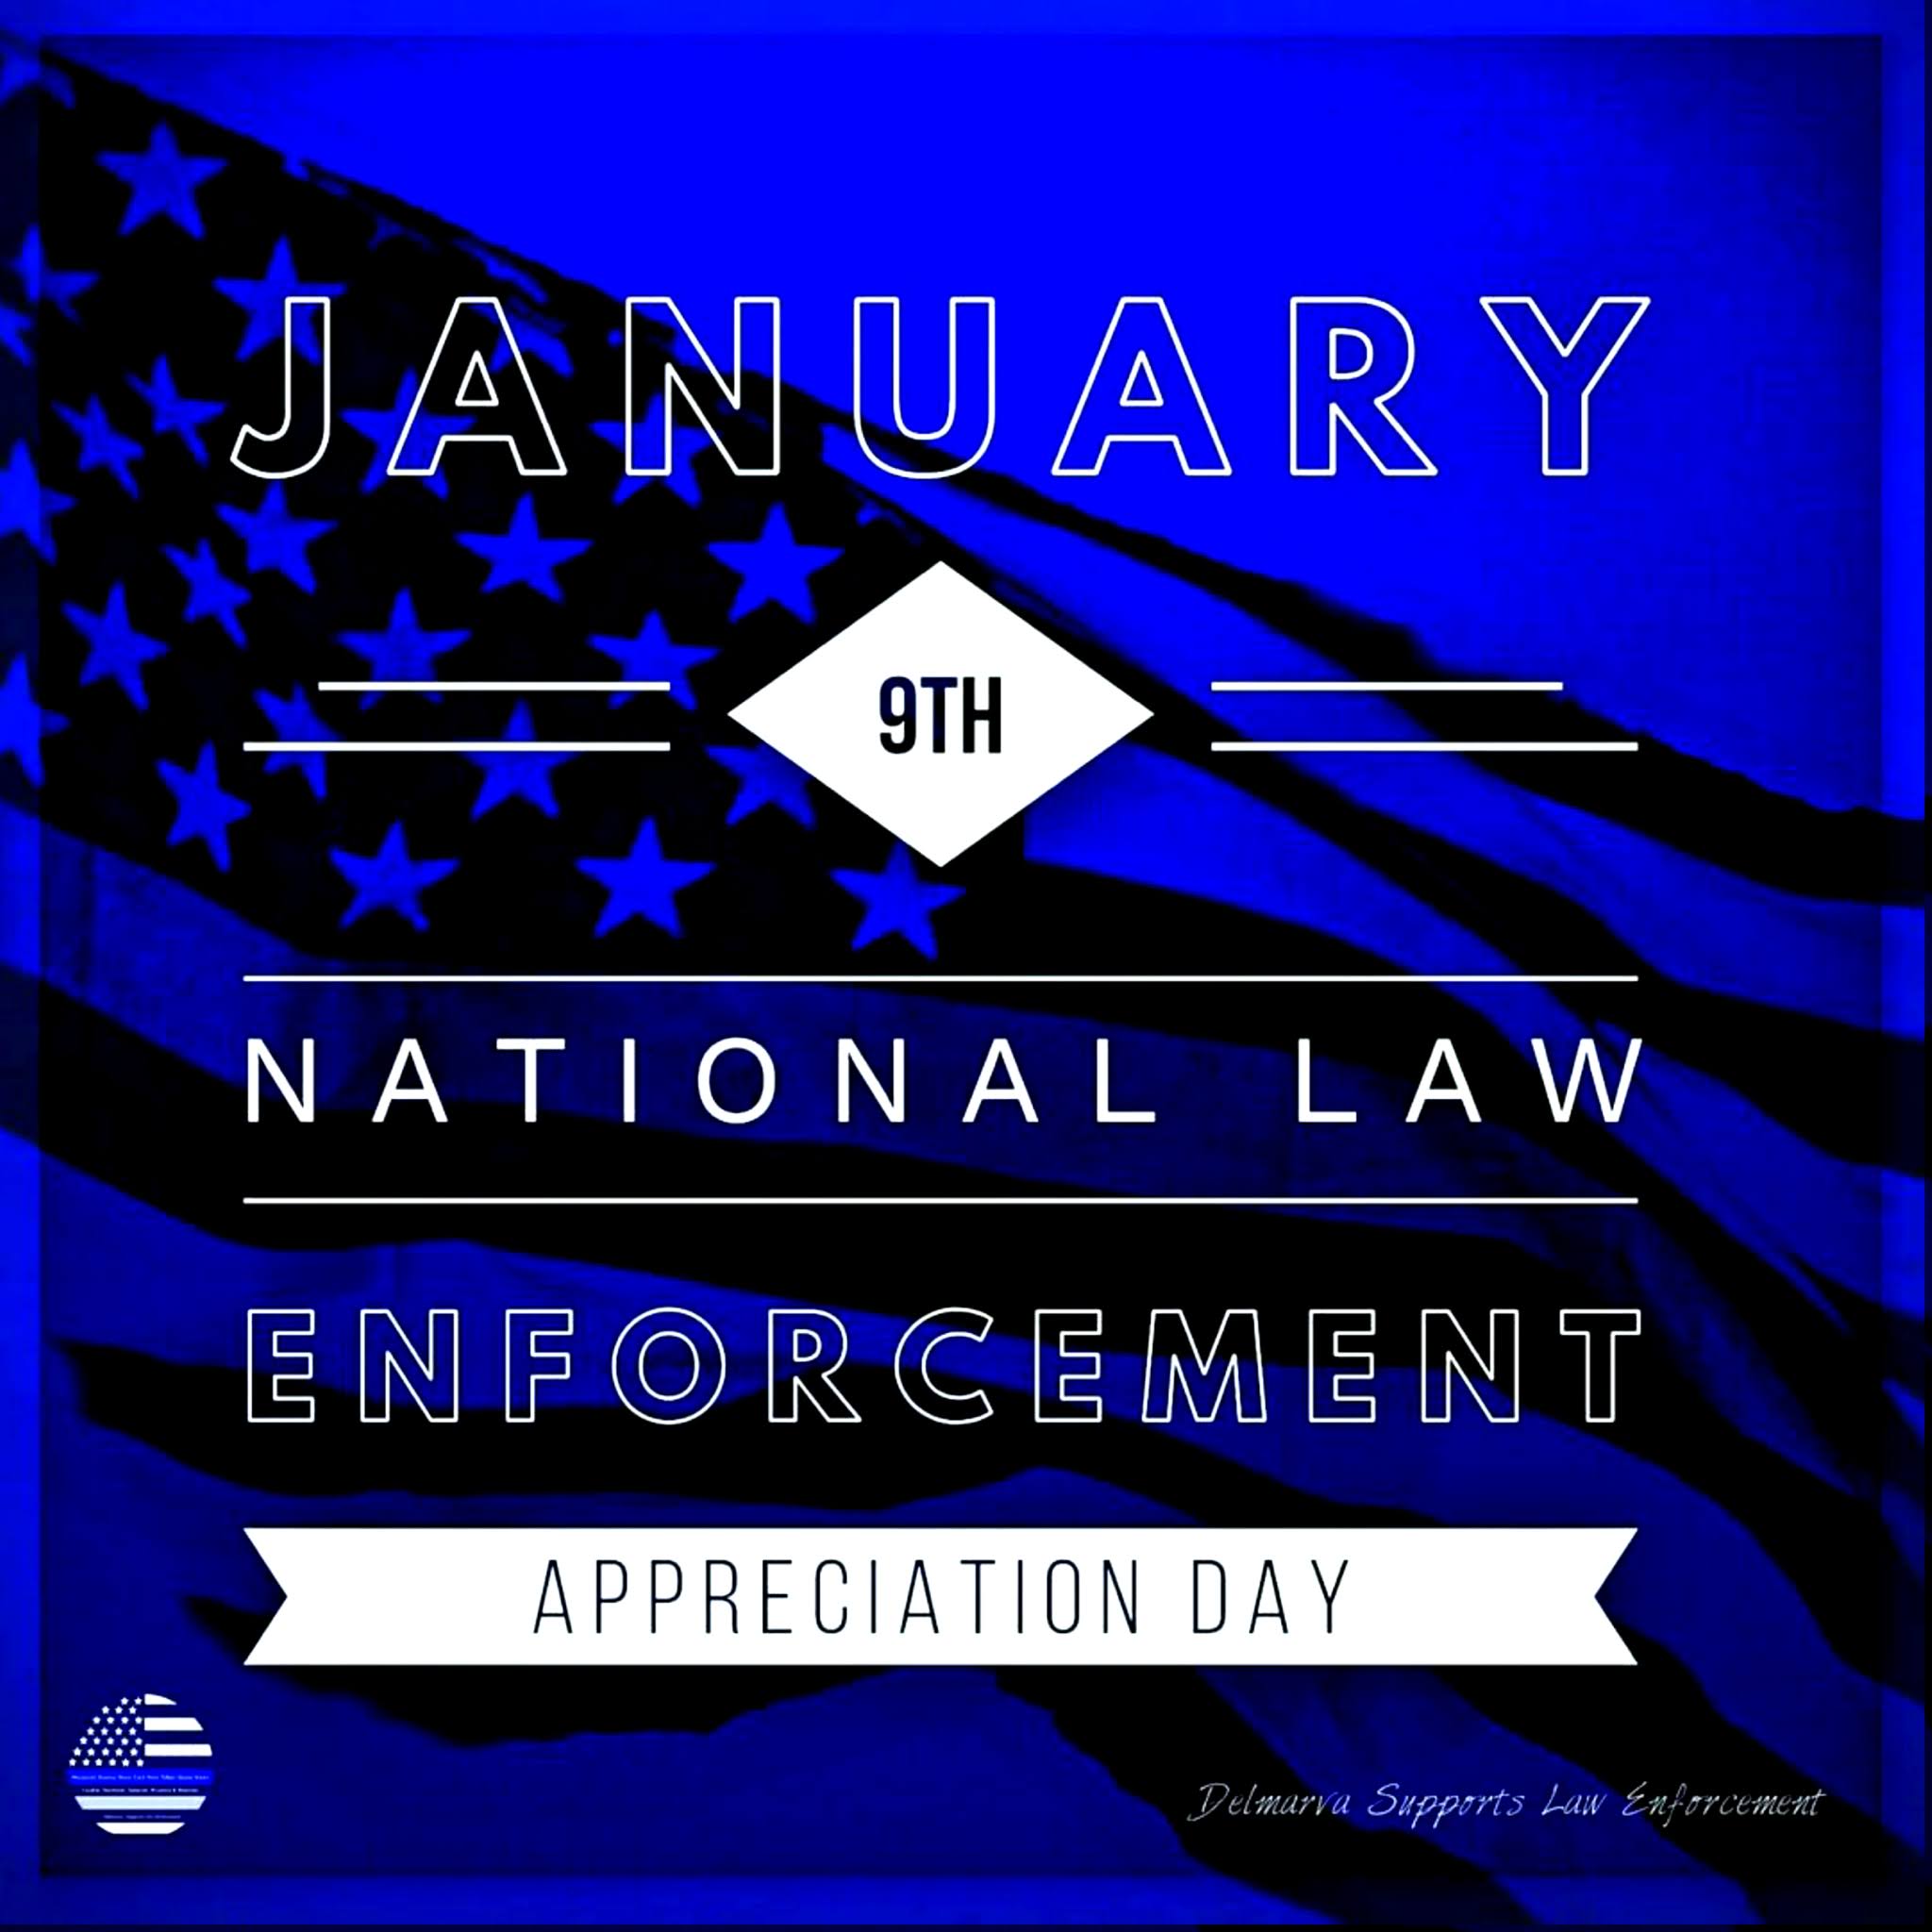 Delmarva Supports Law Enforcement January 9th, 2021 National Law